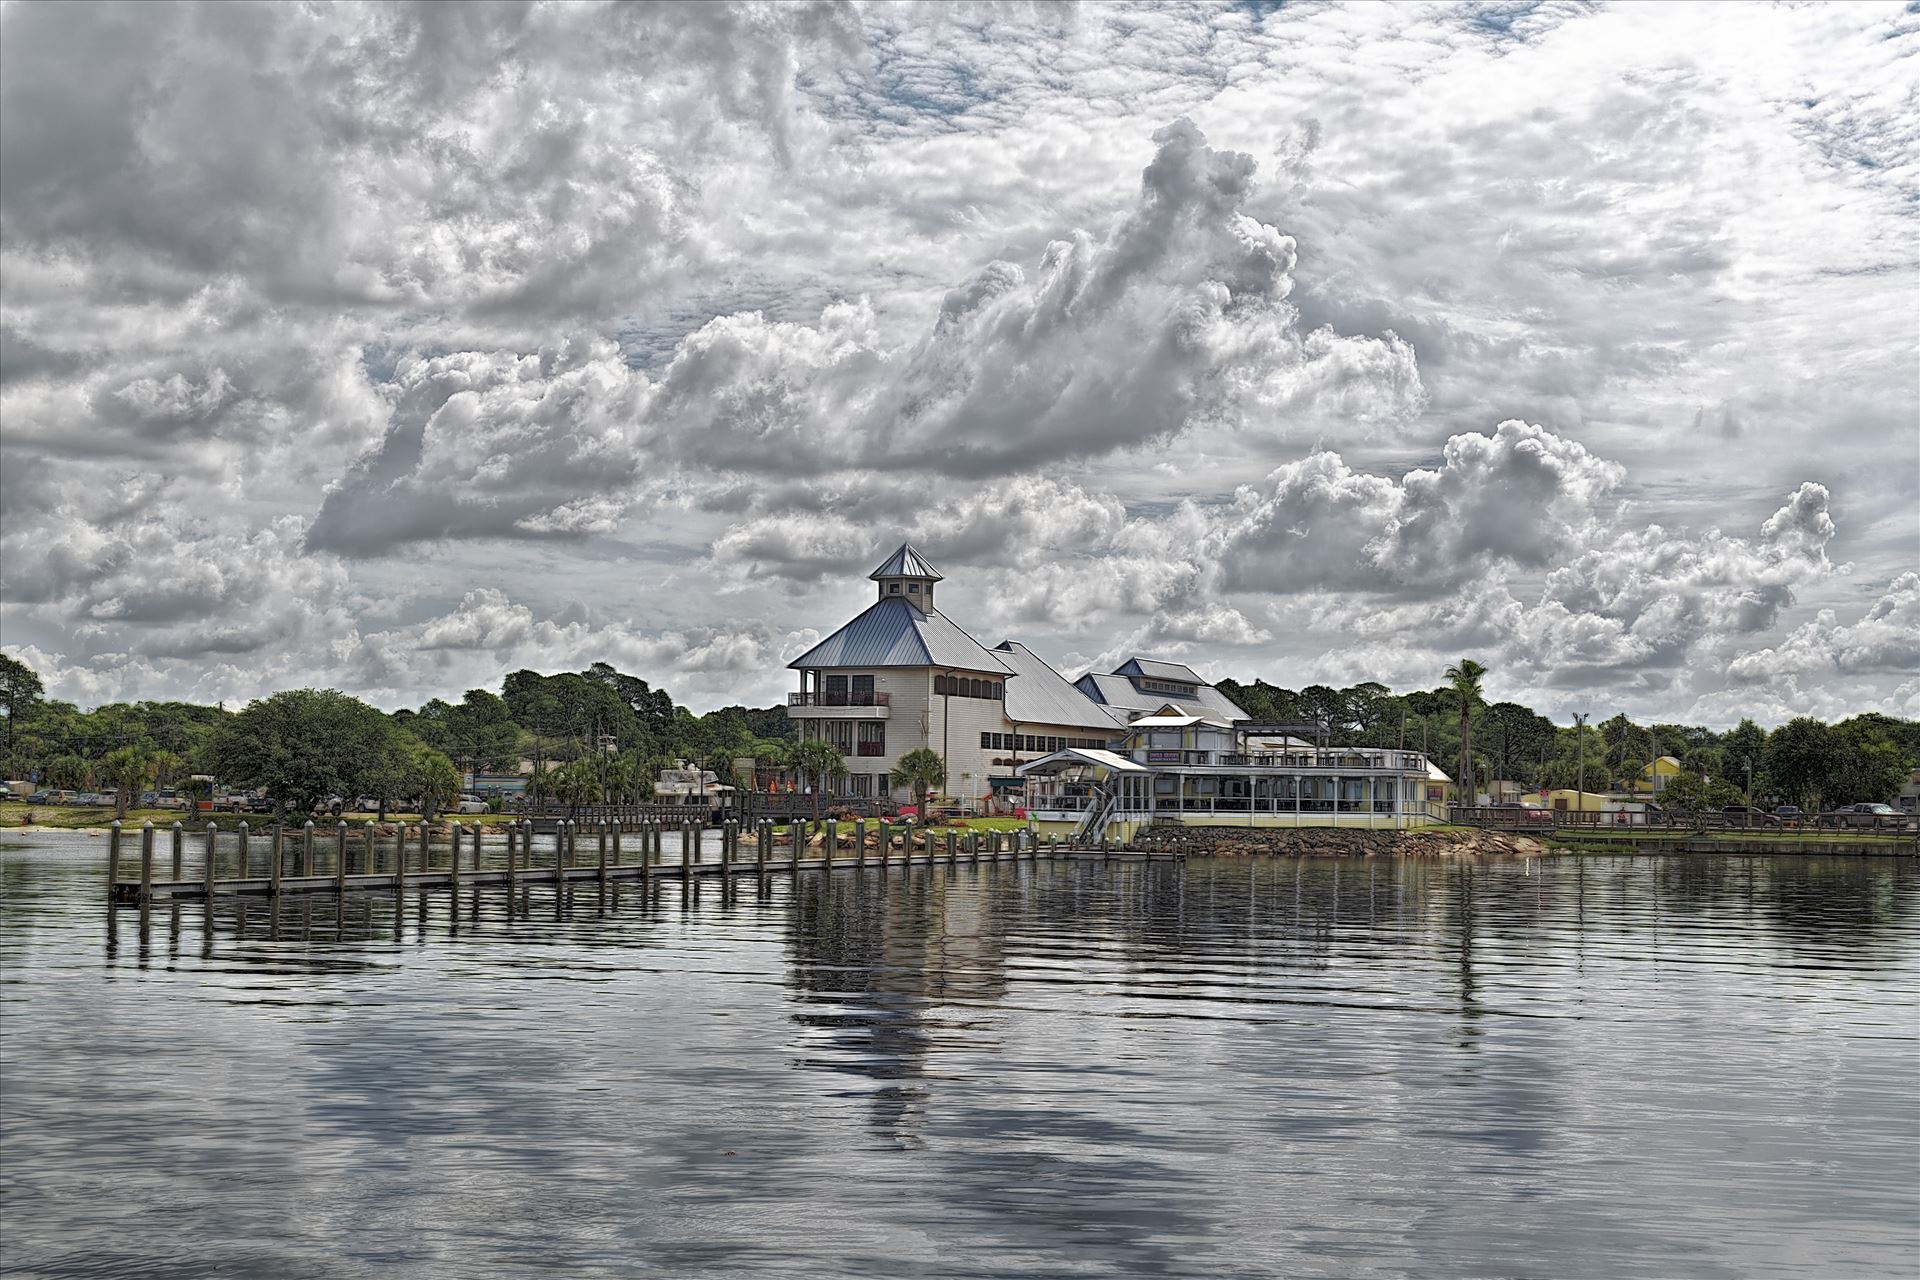 The Shrimp Boat and Uncle Ernie\'s Bayfront Grill at the St. Andrews Marina 8500109.jpg - The Shrimp Boat Restaurant and Uncle Ernie's Bayfront Grill, photo taken from the St. Andrews Marina by Terry Kelly Photography